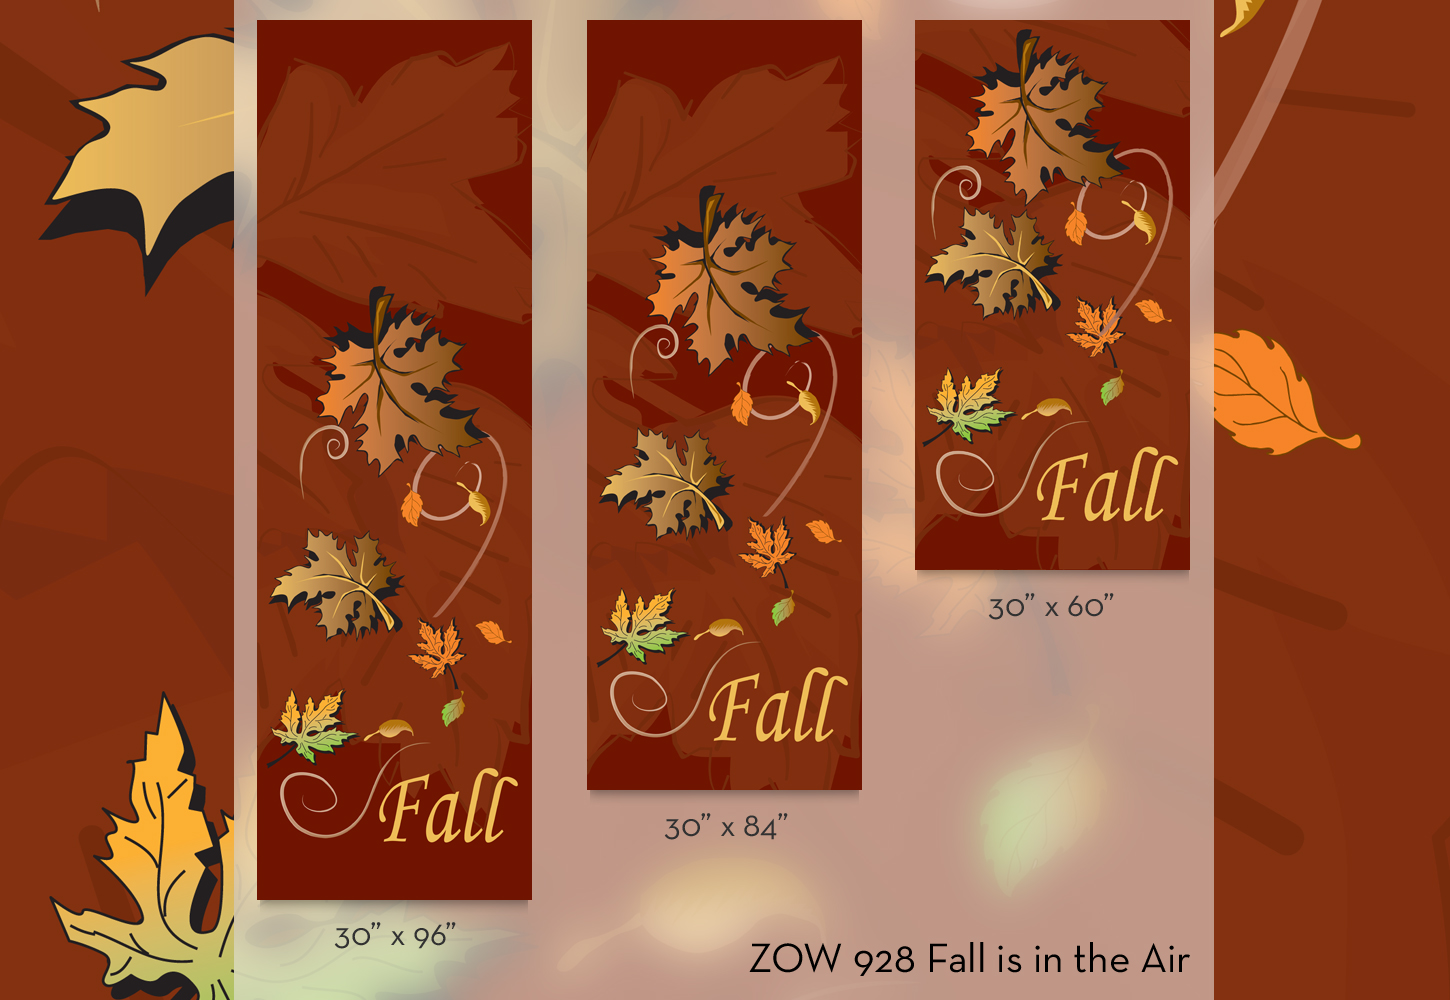 ZOW 928 Fall is in the Air